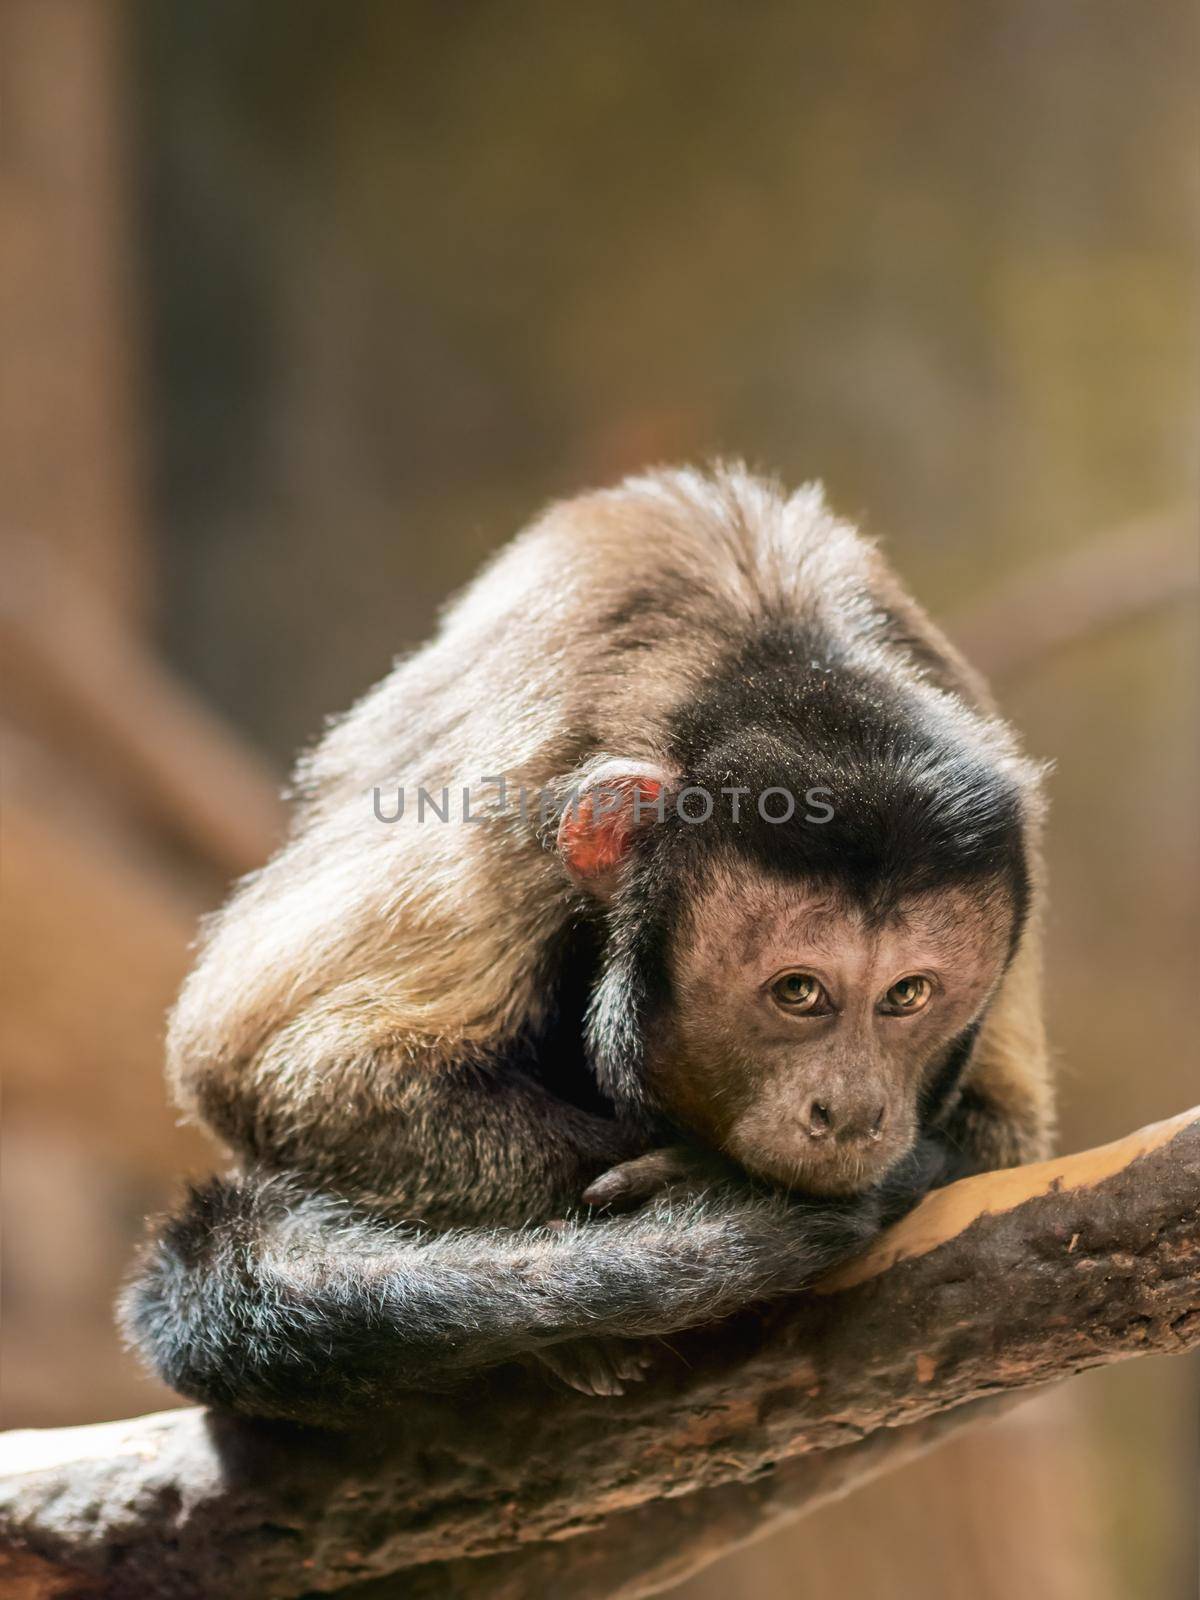 Mindful Black Capuchin or Sapajus Nigritus, also known as Black-horned Capuchin. Brown-colored monkey deep in thoughts. by aksenovko